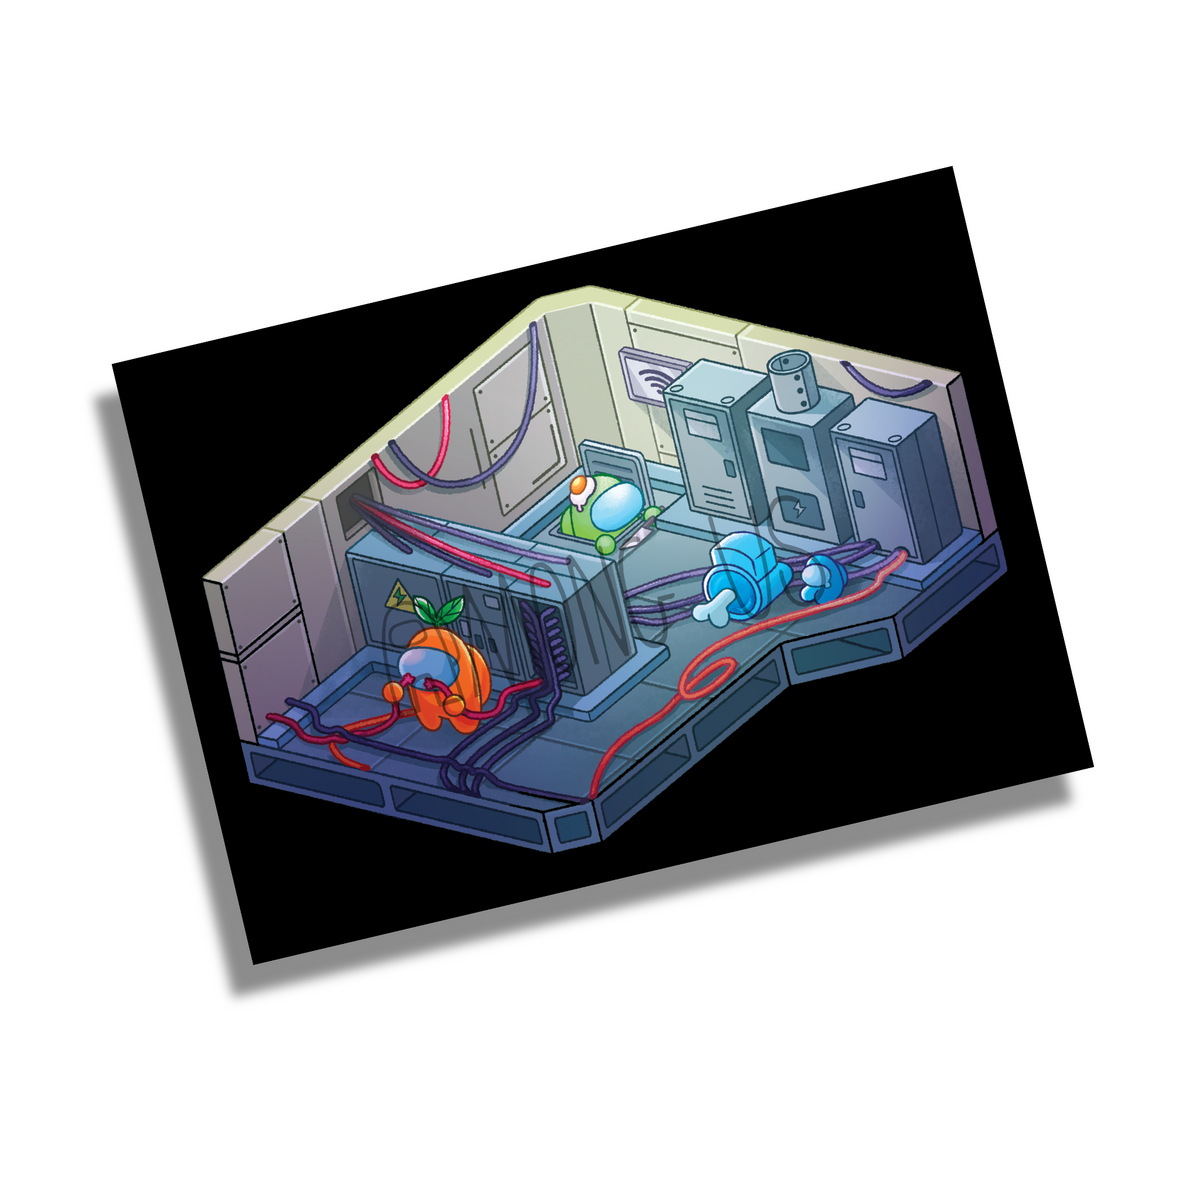 A product photo of the Among Us: Isometric Skeld Print by Woudi M. The print shows three crewmates in the electrical room. An orange crewmate with a green sprout hat connects two red wires. A blue crewmate lays dead on the floor. A green crewmate with an egg hat peeks out of a vent. 